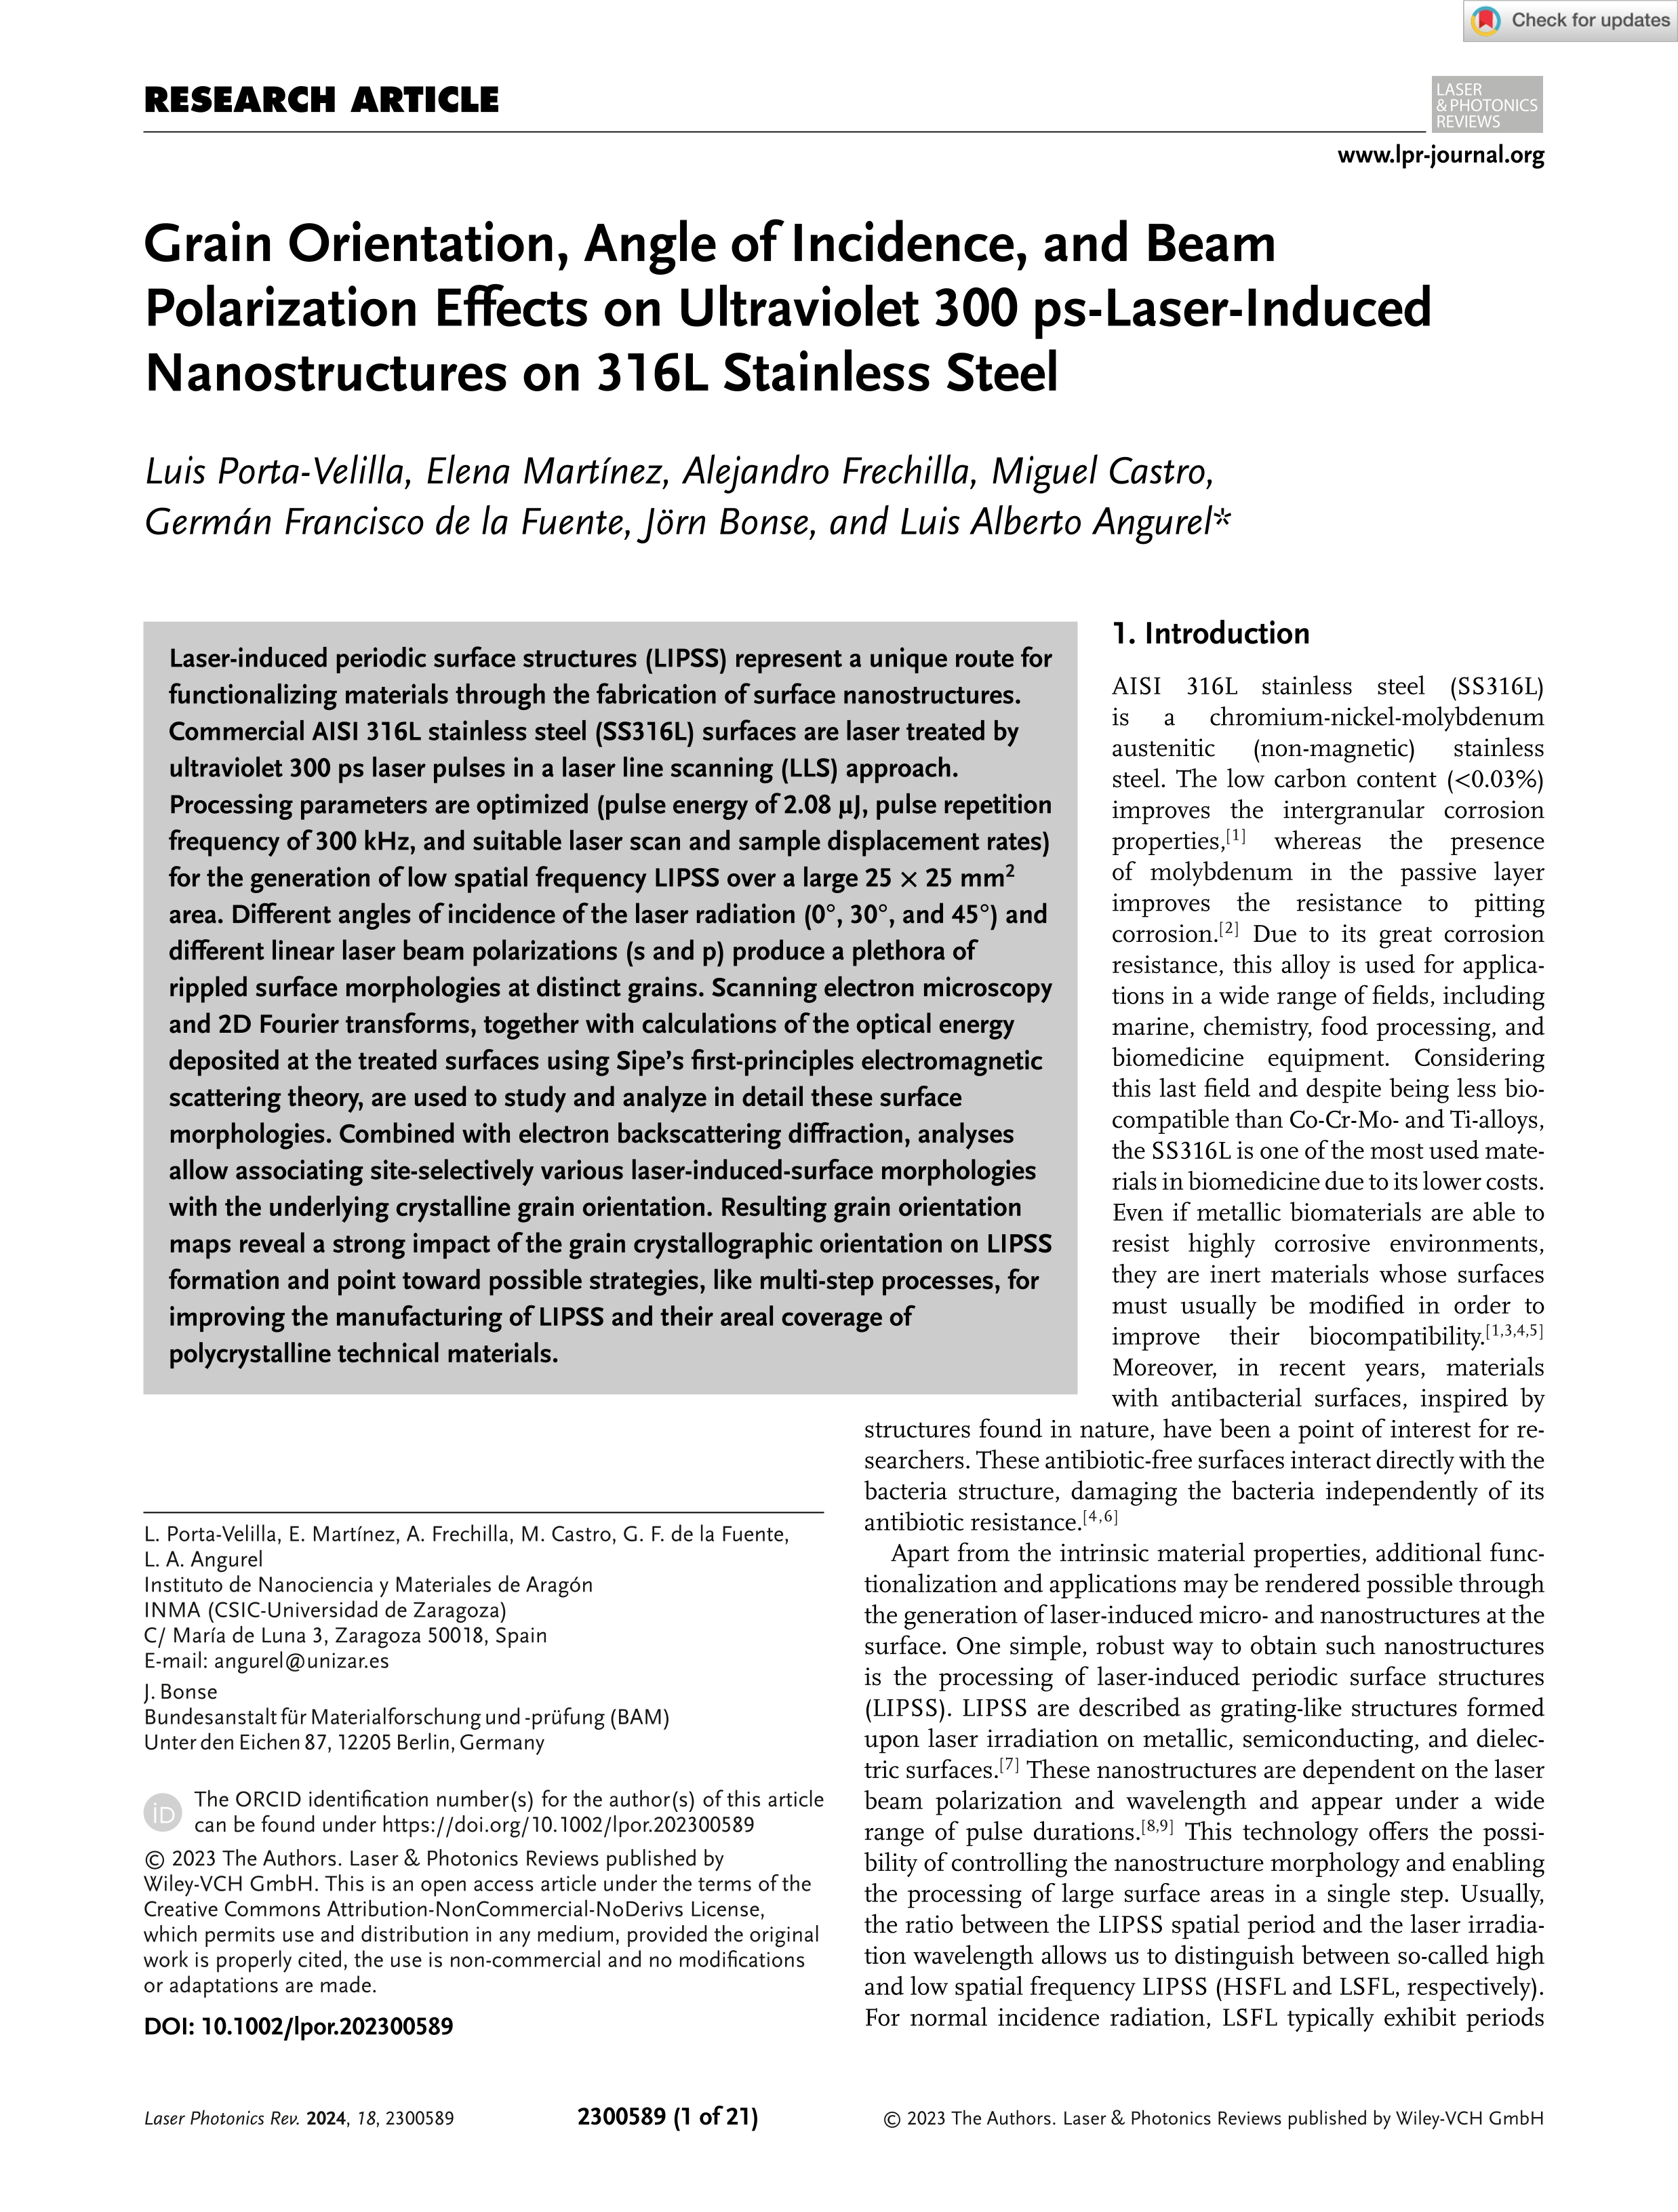 Grain Orientation, Angle of Incidence, and Beam Polarization Effects on Ultraviolet 300 ps-Laser-Induced Nanostructures on 316L Stainless Steel